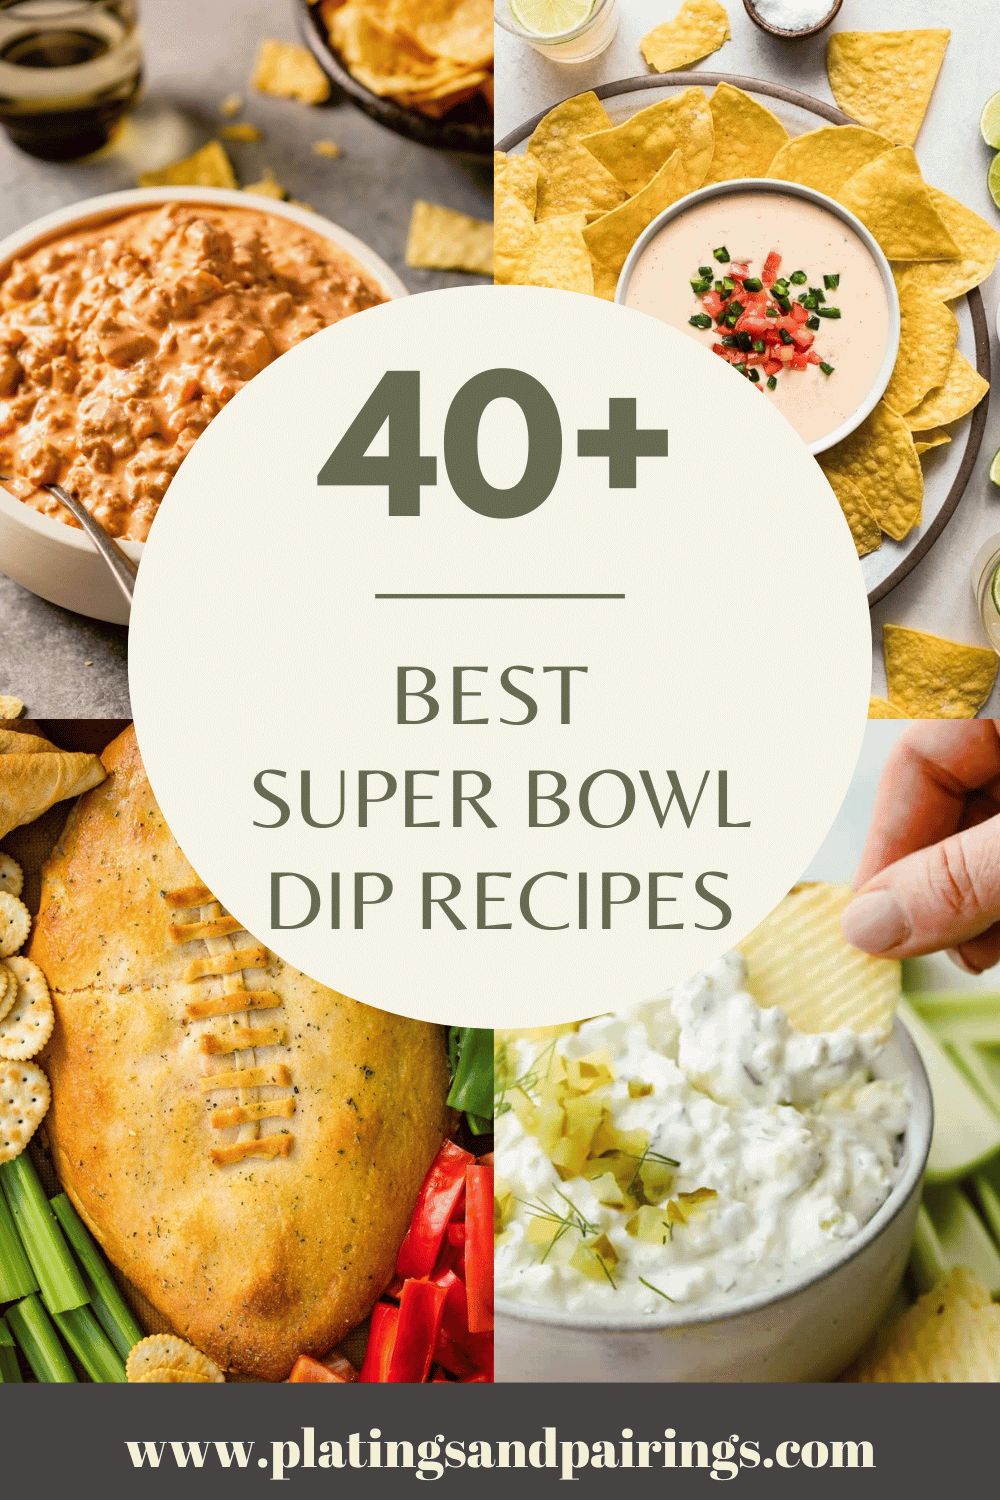 Collage of Super Bowl dips with text overlay.